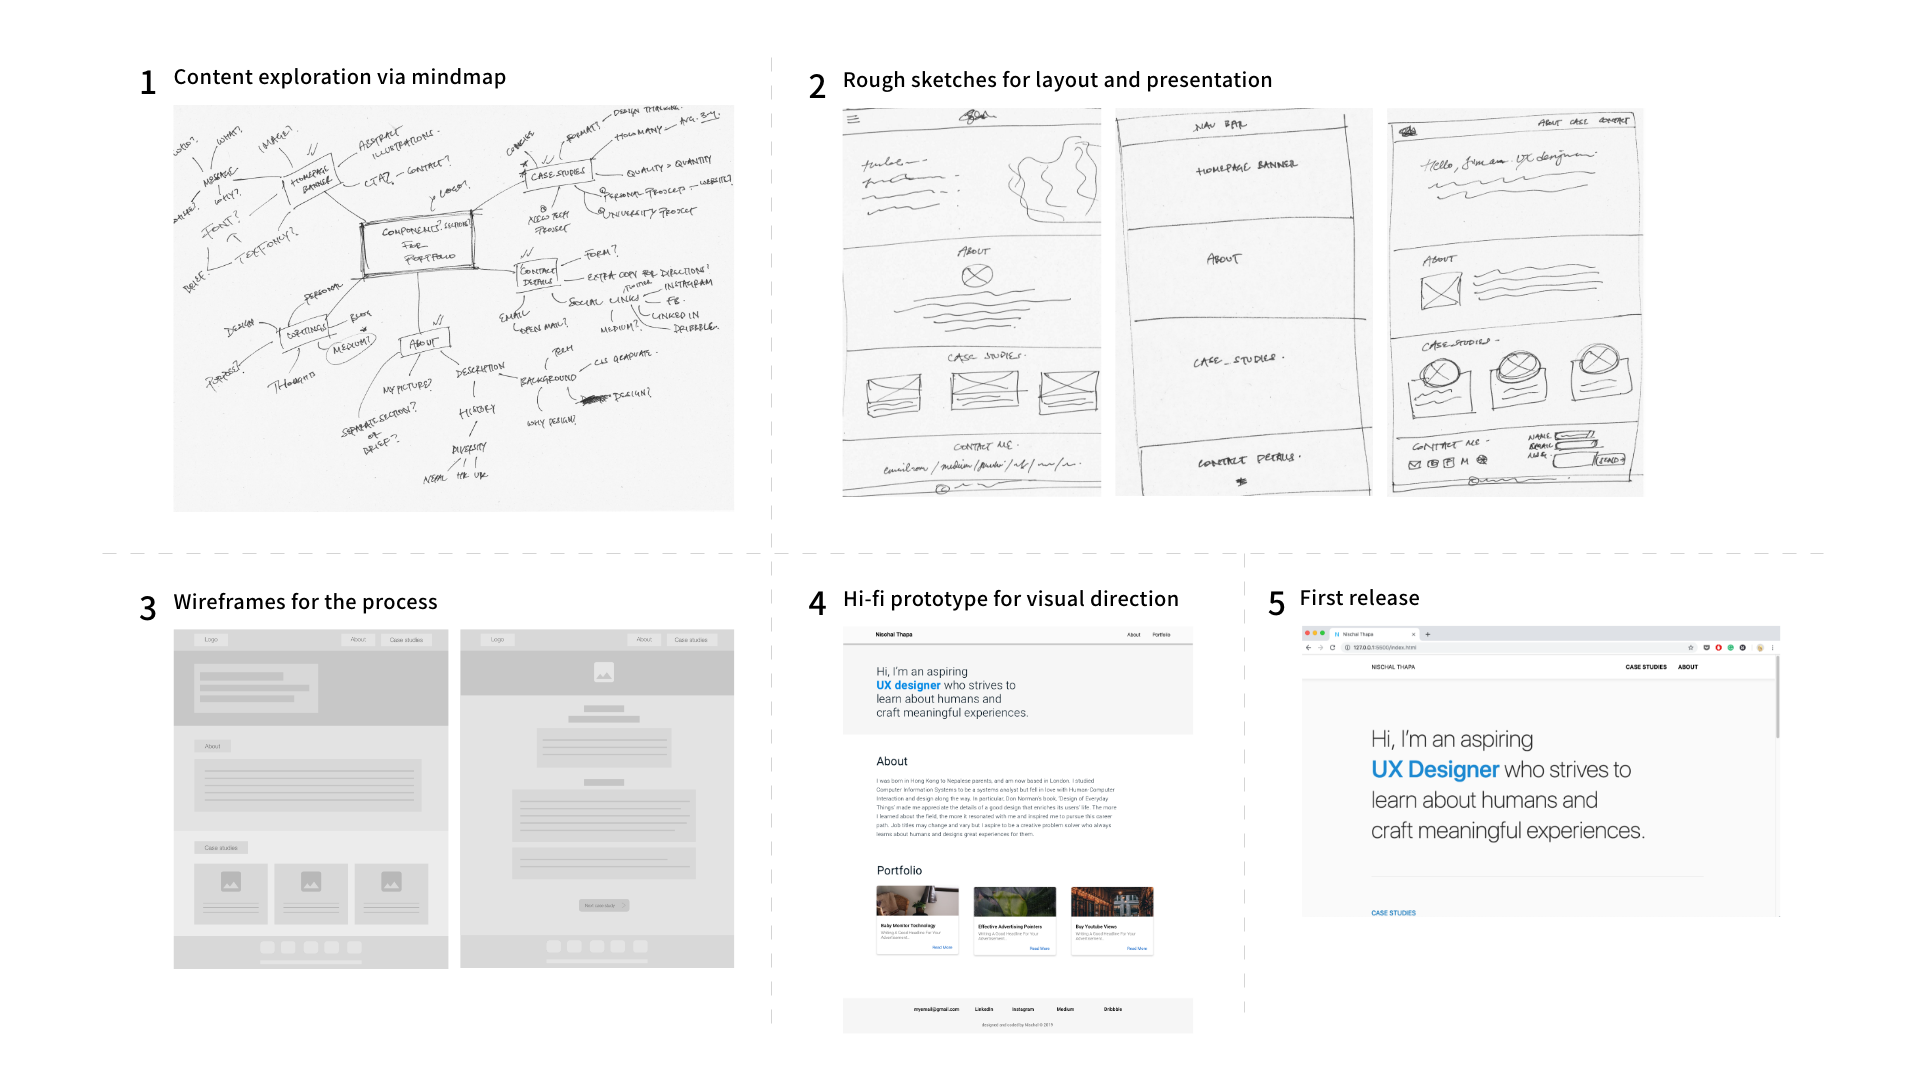 The process starts from mindmap exploring content, rough layout sketches, wireframes and high-fifelity prototypes.